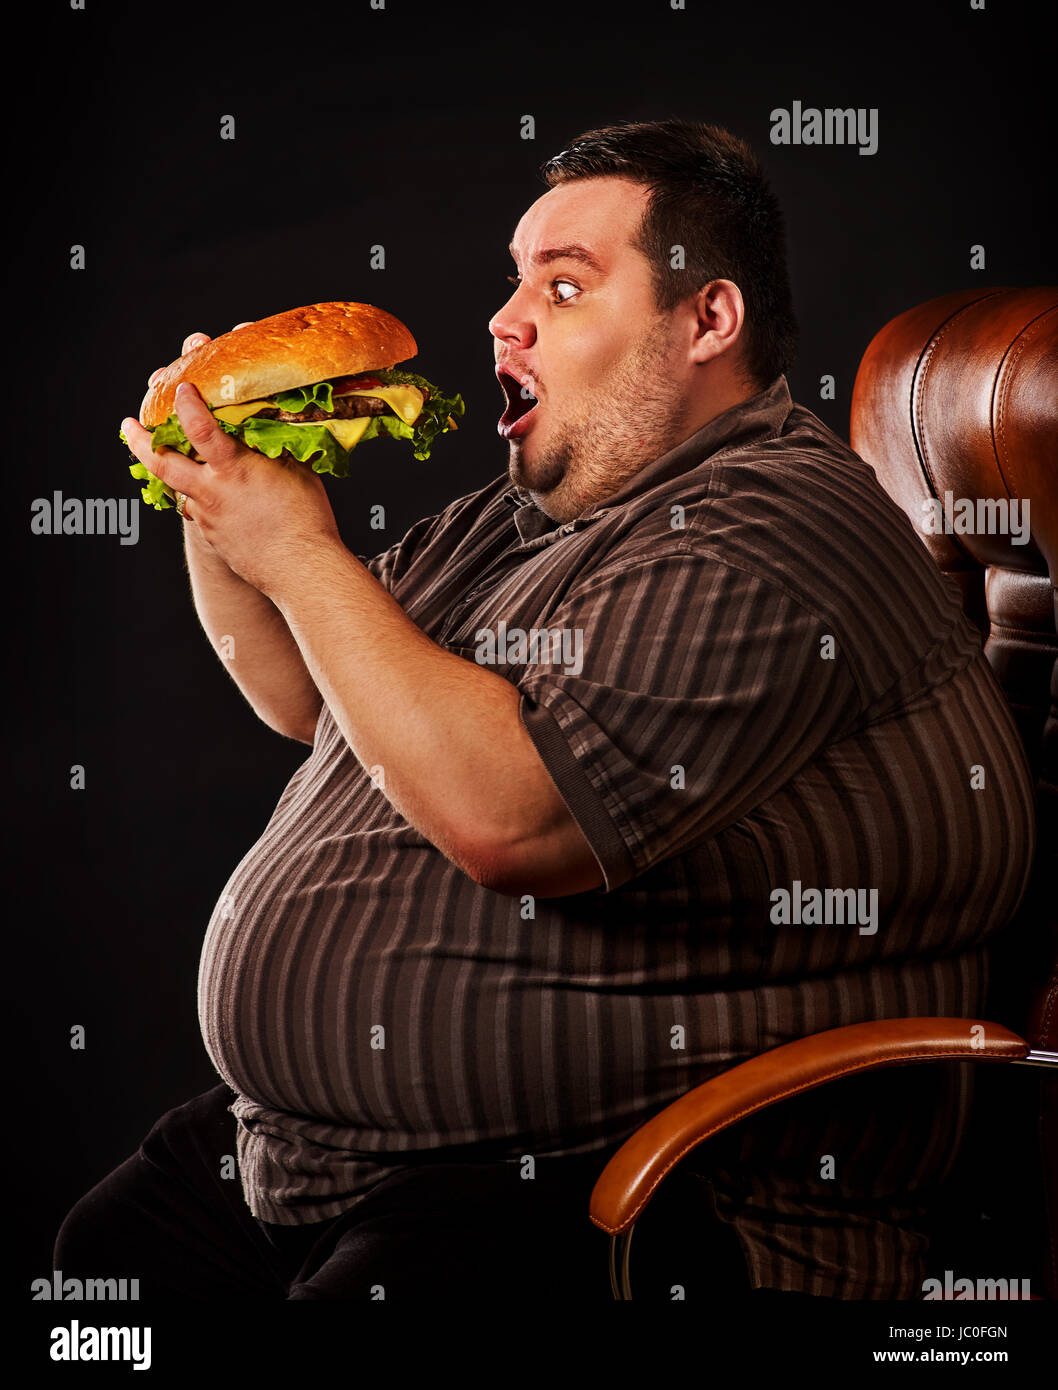 Diet failure of fat man eating fast food hamberger. Happy overweight person  spoiled healthy food by greedily eating huge hamburger. Junk meal leads to  Stock Photo - Alamy